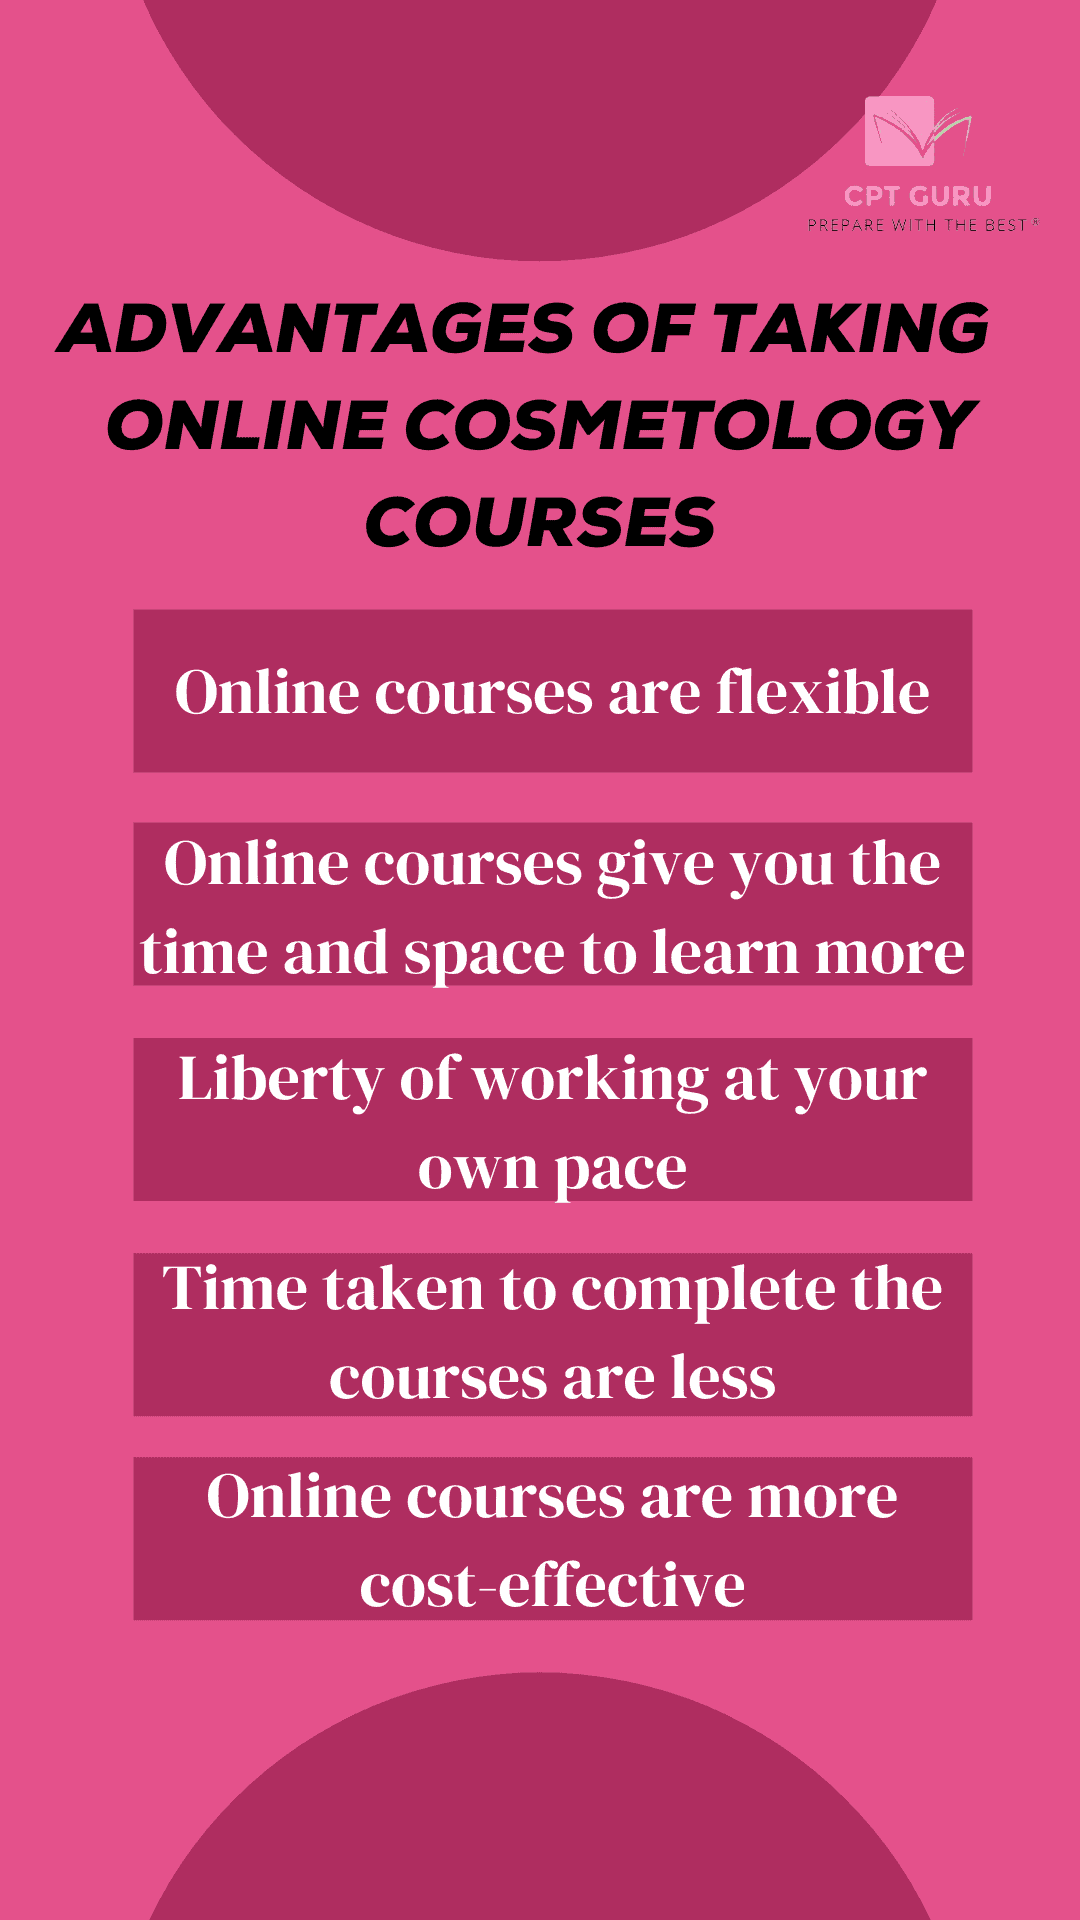 Advantages of taking online cosmetology courses 